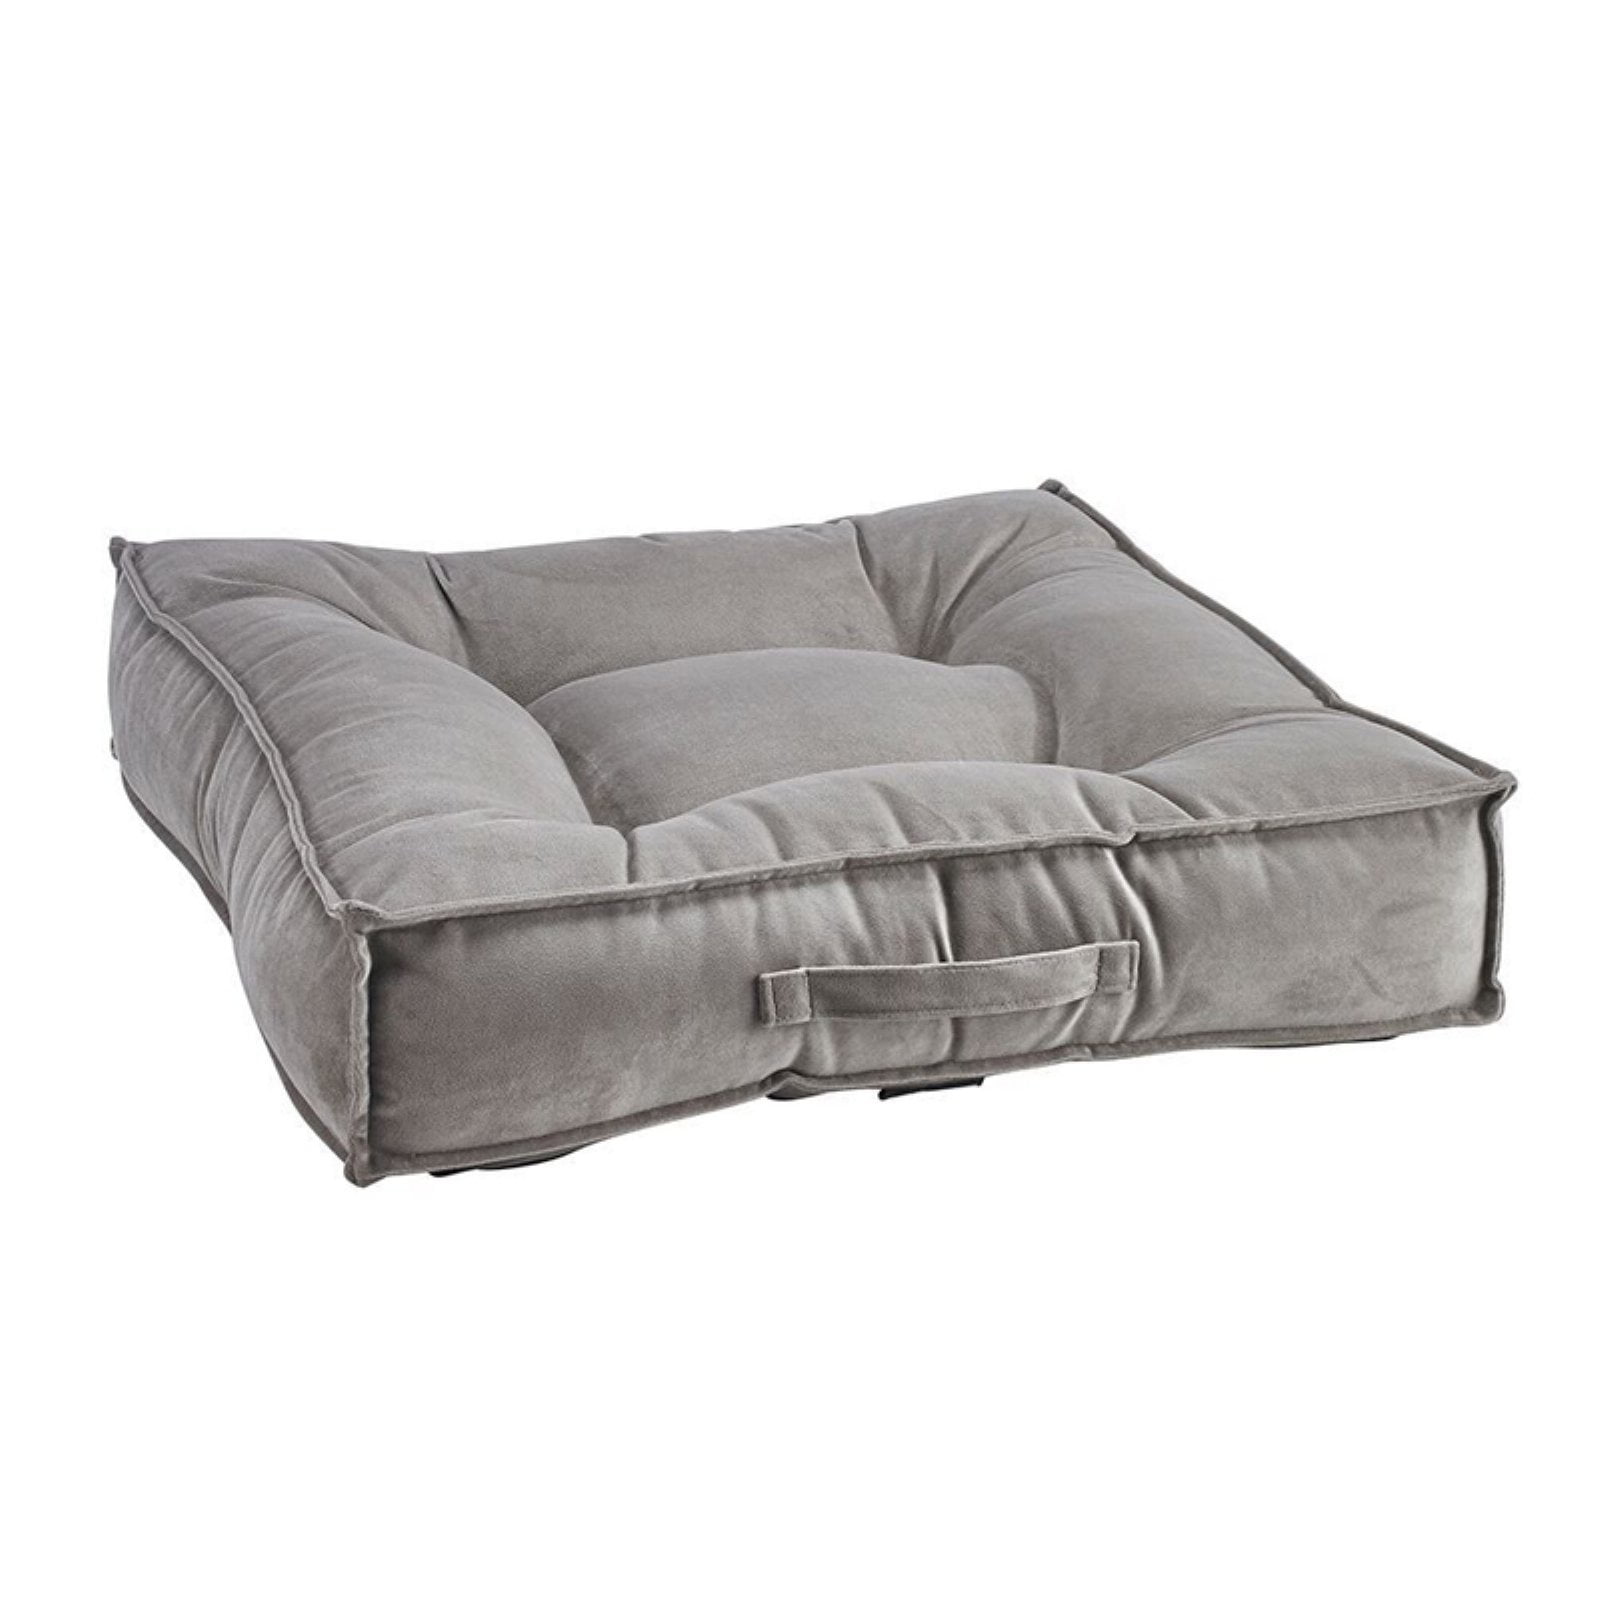 Bowsers MicroVelvet  PEBBLE FAUX FUR CHINCHILLA Scoop Nest Dog Bed — Pick Size 